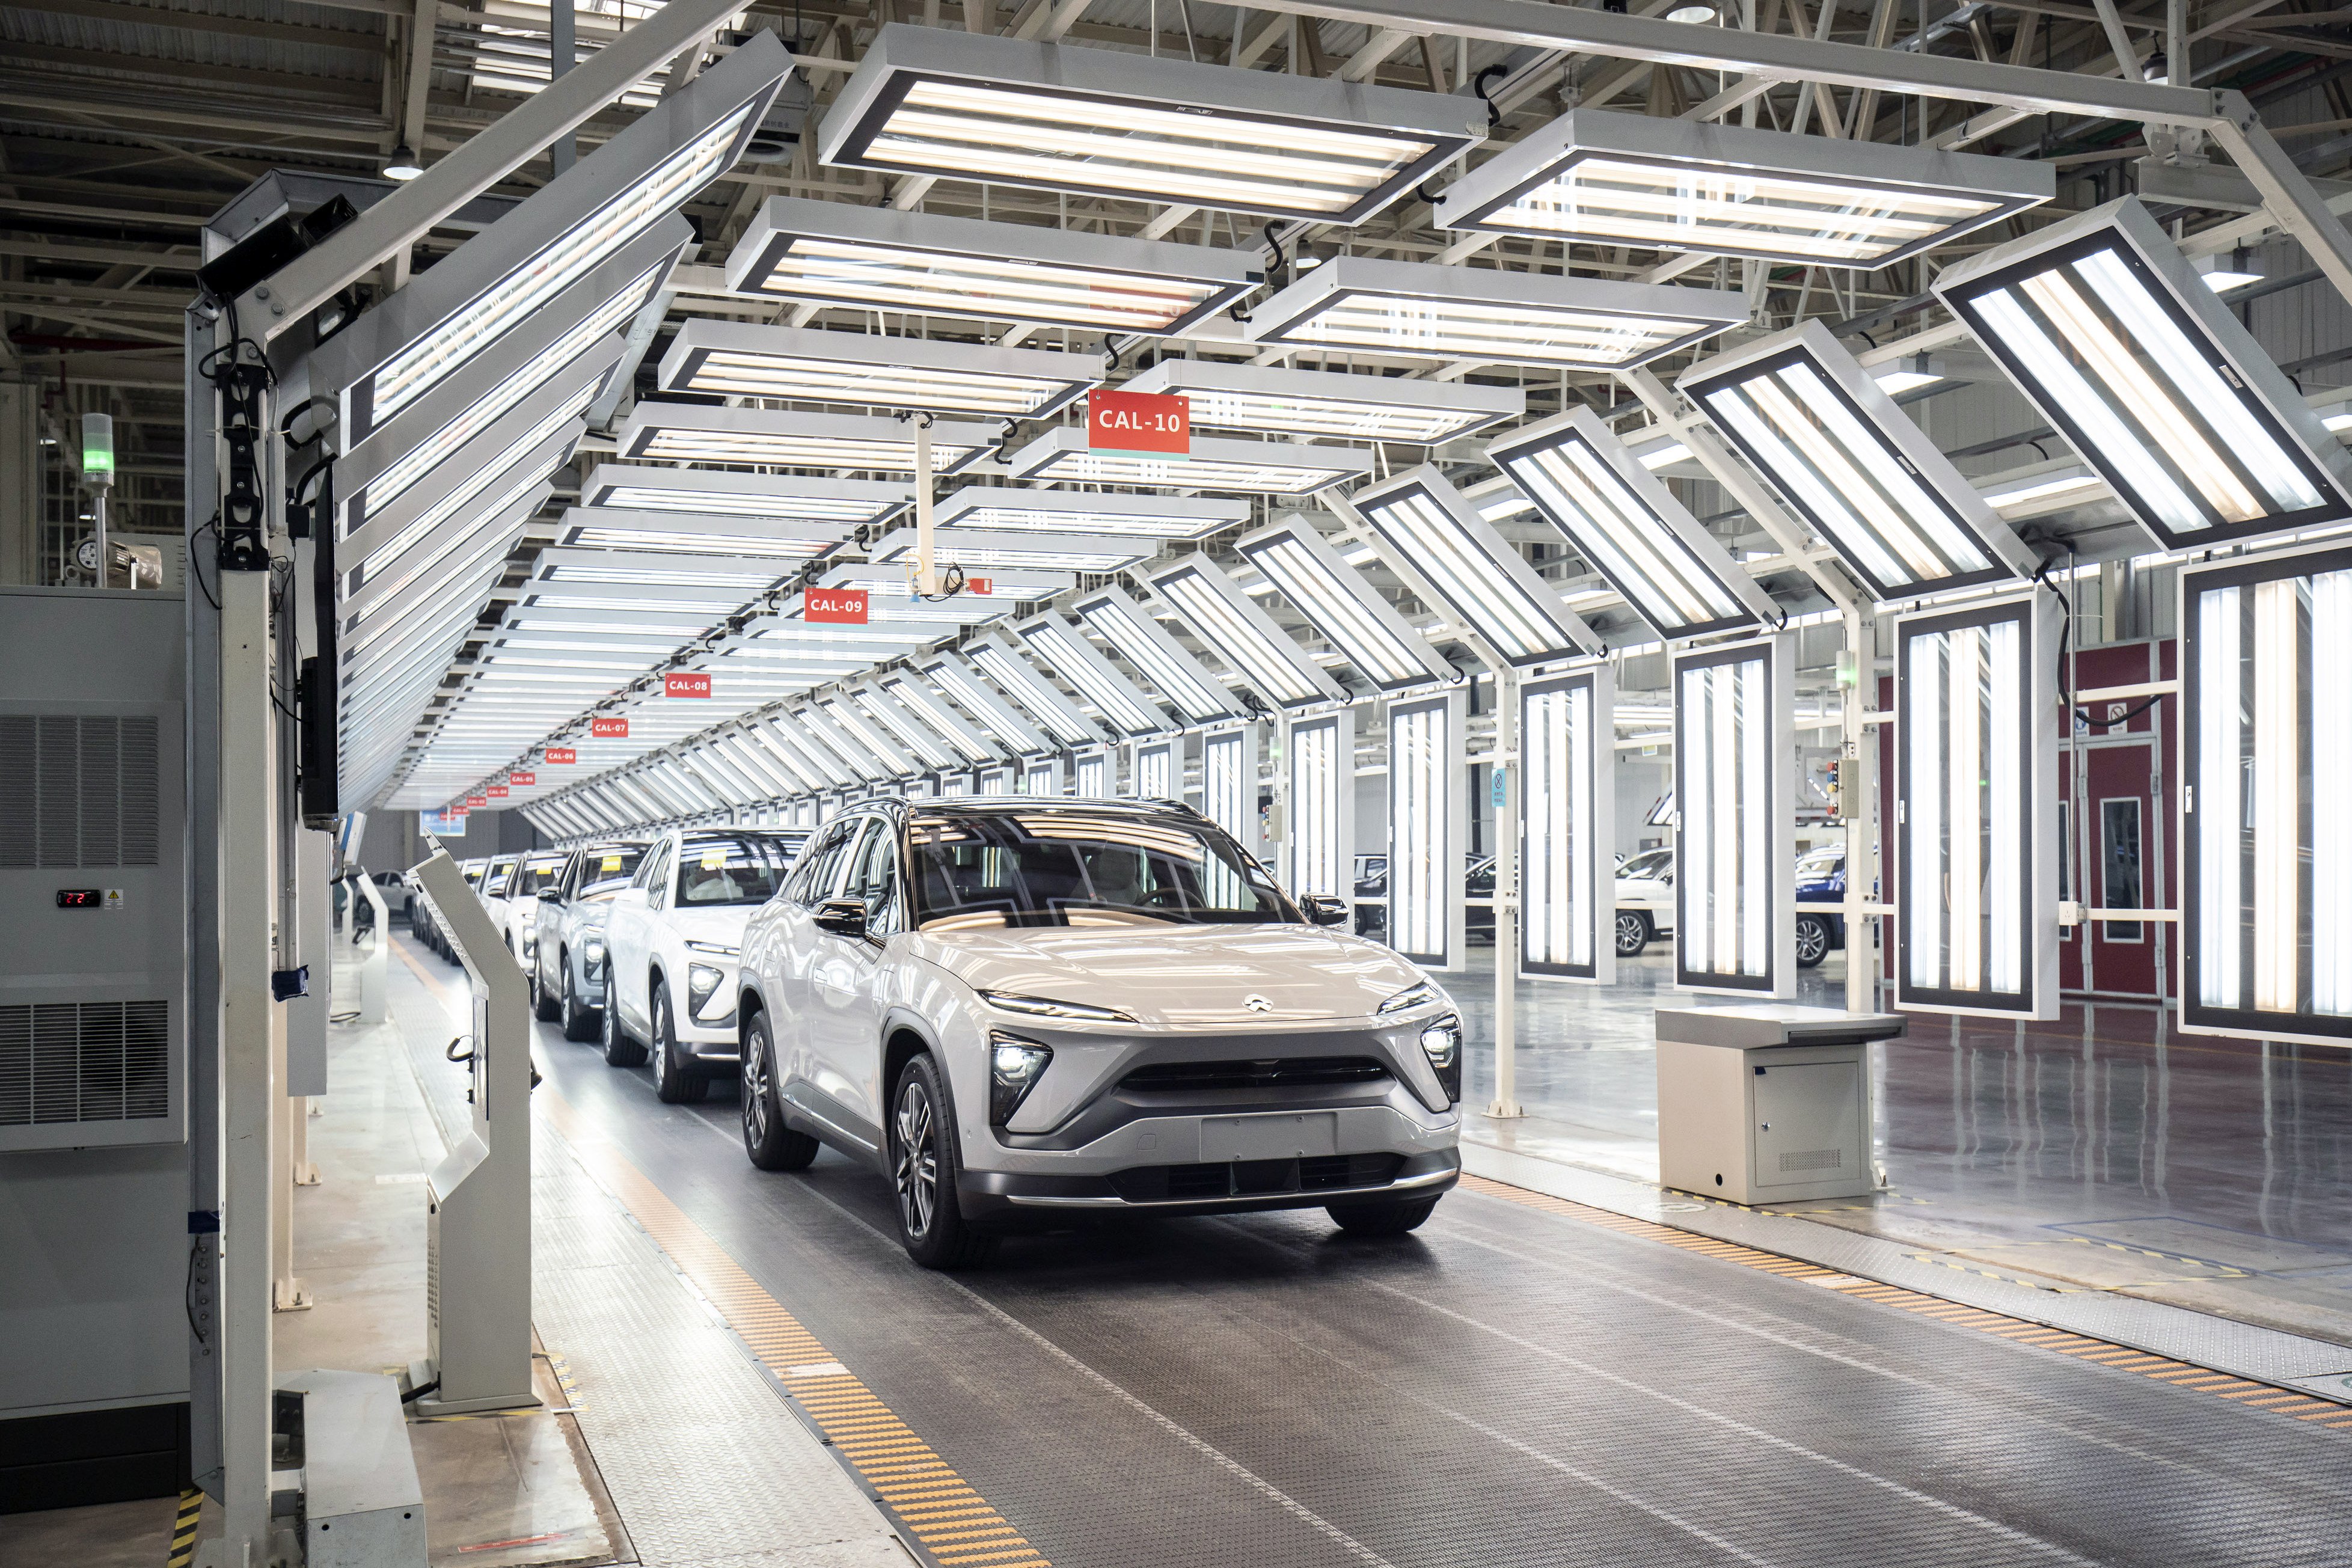 Nio Inc. electric vehicles rolled off the production line during an event at the automaker’s factory in Hefei, Anhui province, China, on Wednesday, April 7, 2021. Photo: Bloomberg